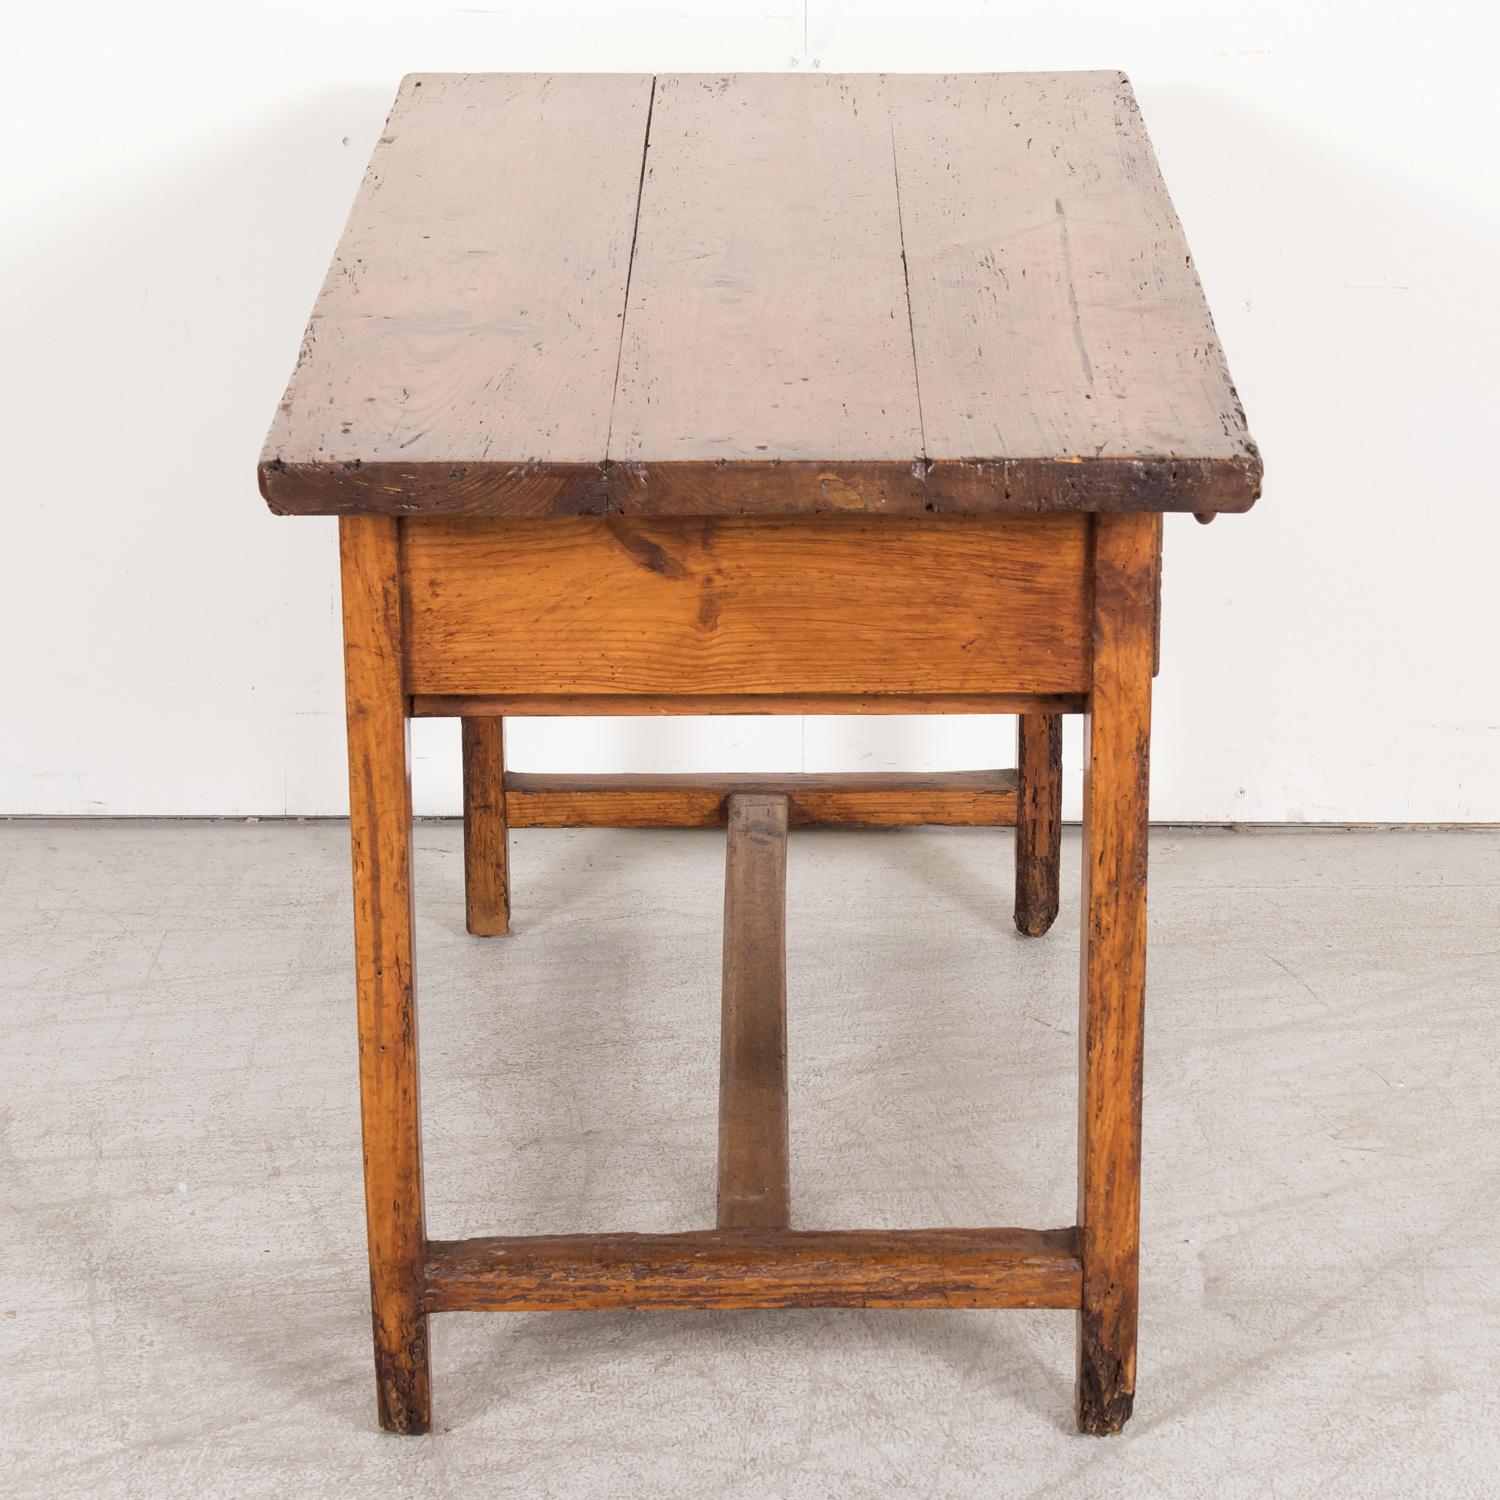 18th Century French Provincial Primitive Larch Wood Side Table or Desk with Draw For Sale 12